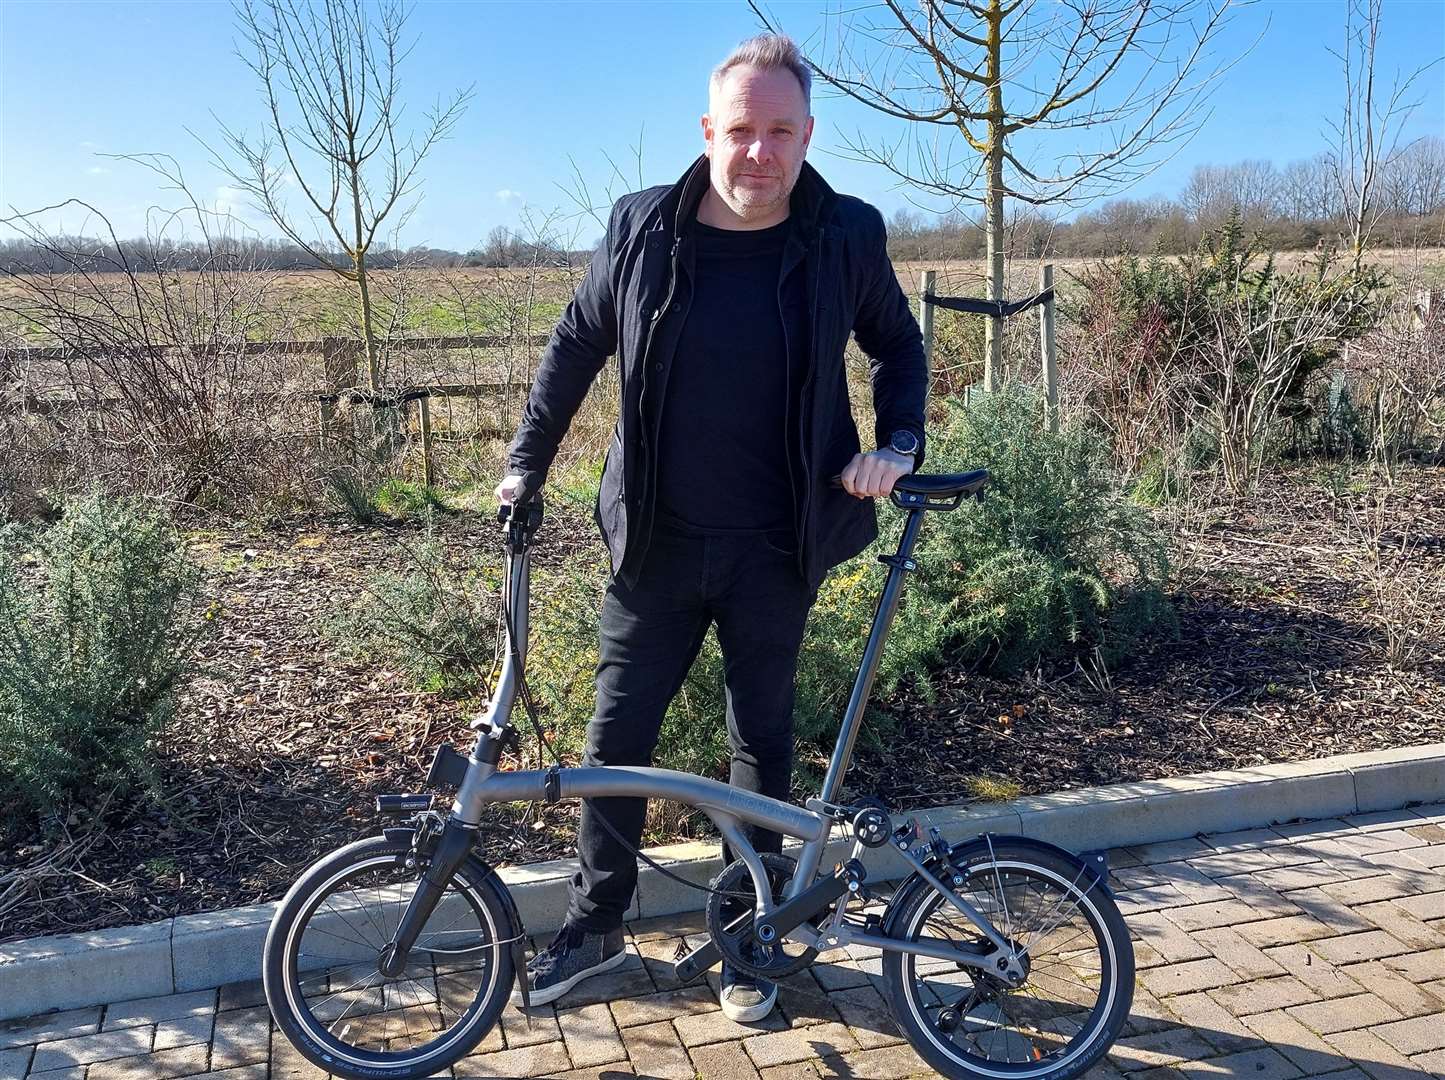 Guy Hollaway with a Brompton bike on the site of the proposed factory in Ashford